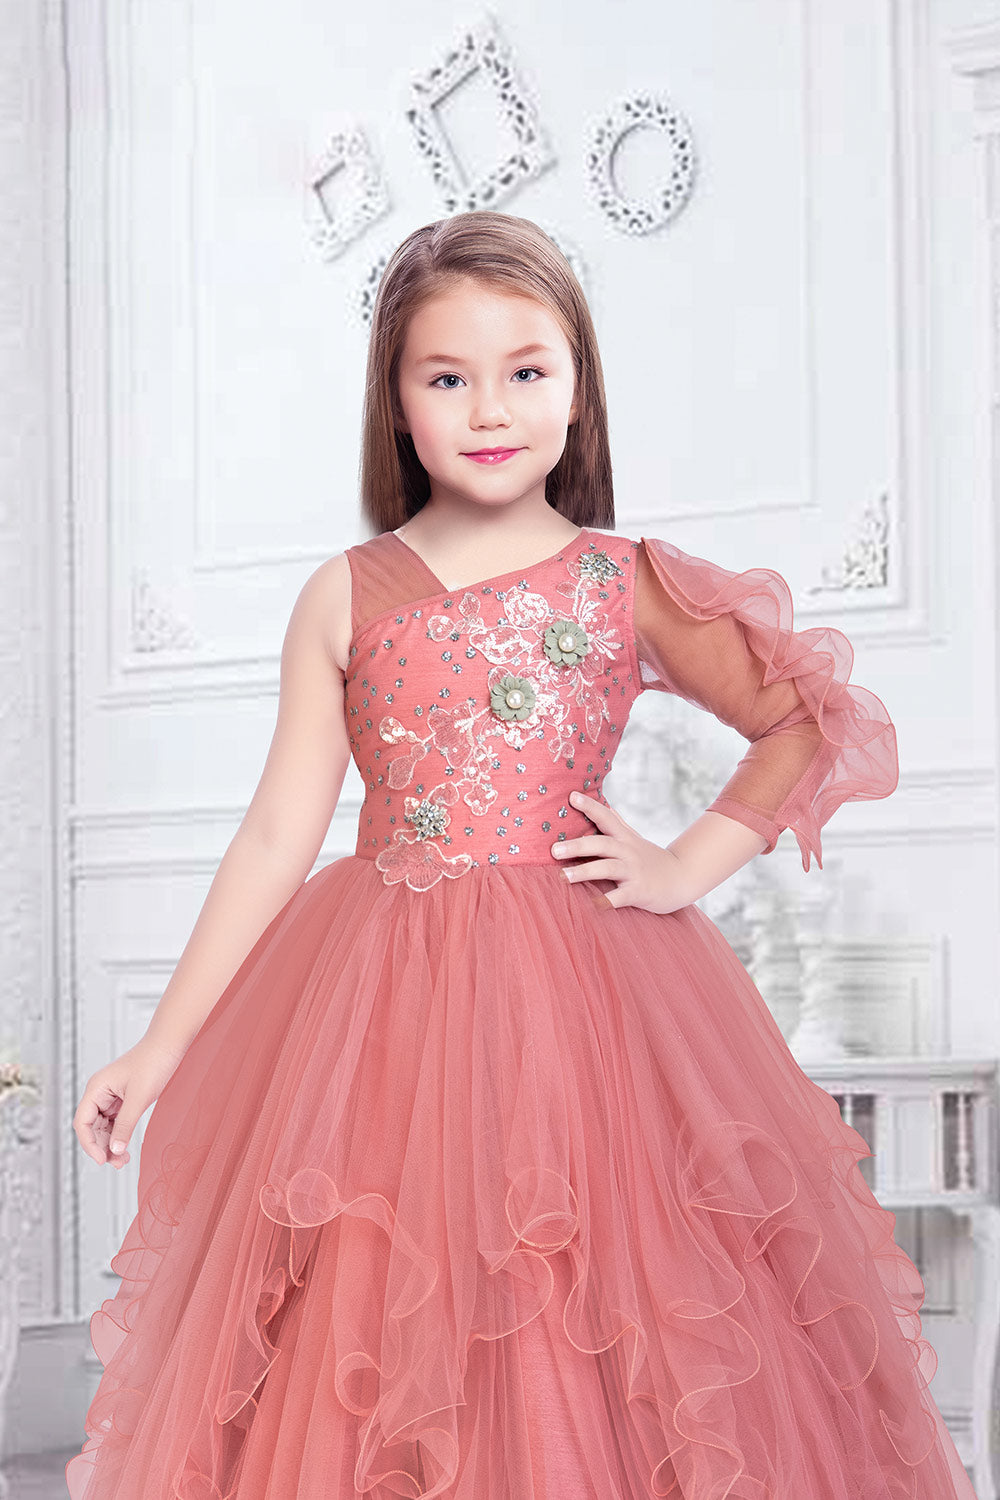 Buy Sequence and Patch Work 4 Layer Frill chamki Gown for Girls (3-4 Years,  Orange) at Amazon.in